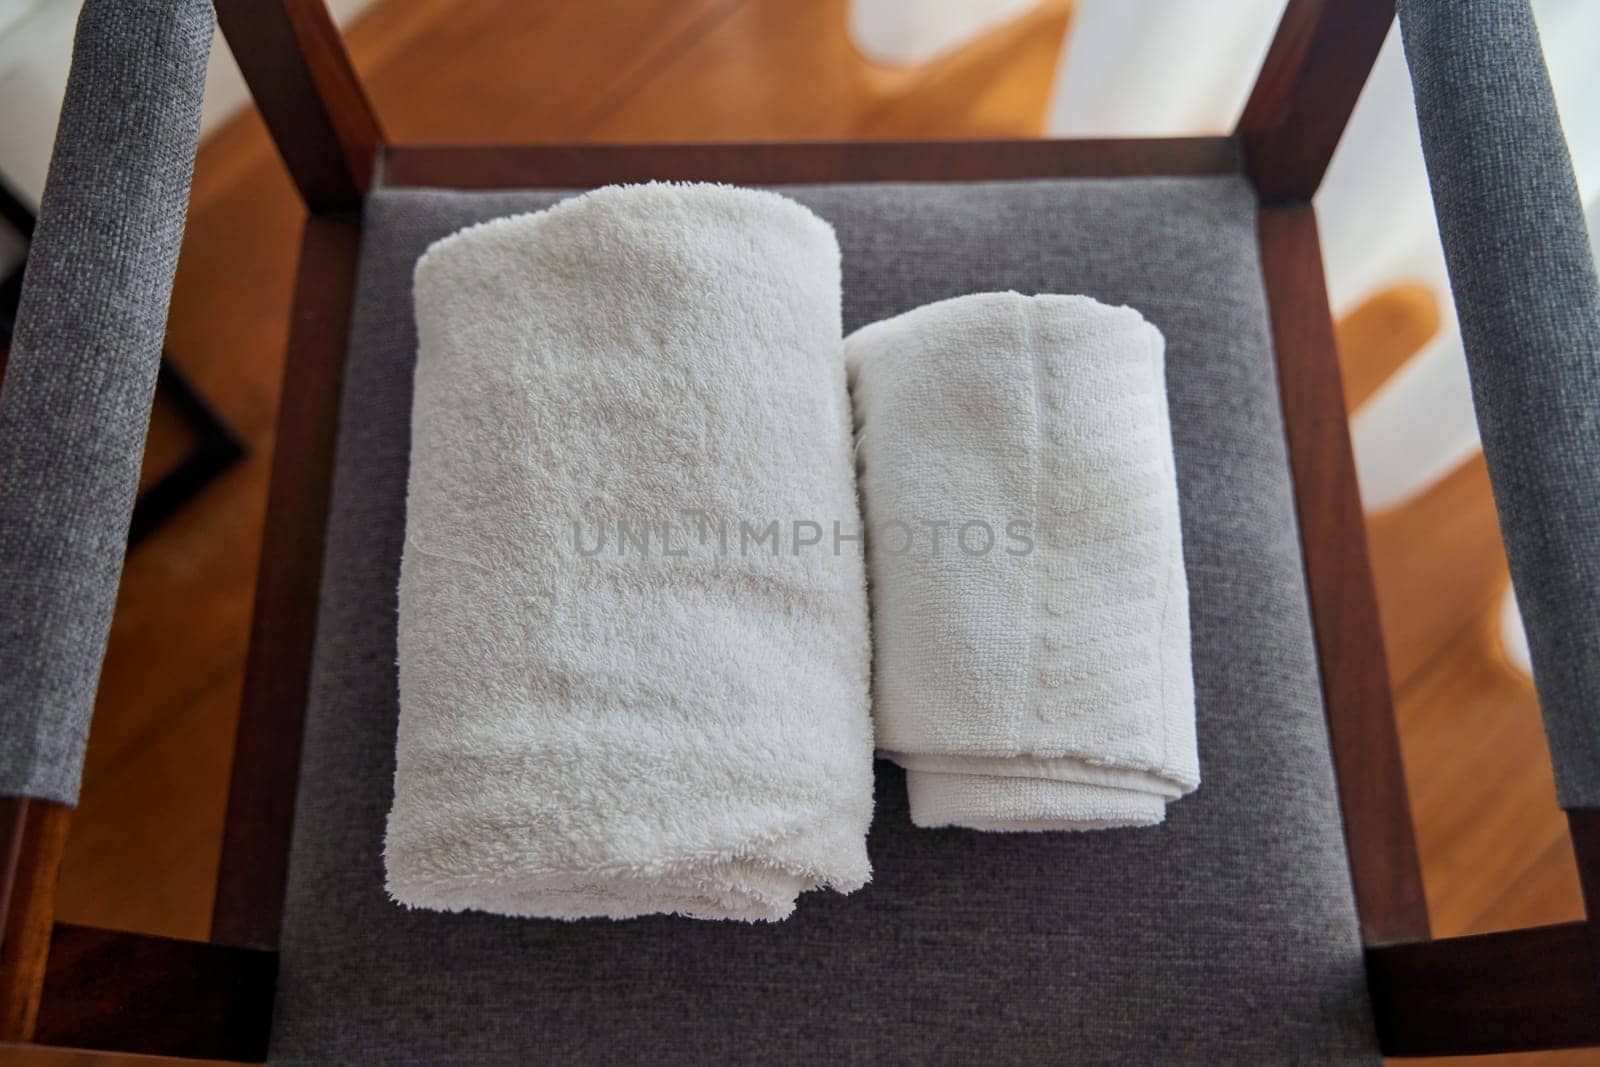 A pair of rolled hardwood towels are placed on a wooden chair, resembling a spiral pattern. The towels sit in a rectangular shape on the chair in a room with wooden flooring